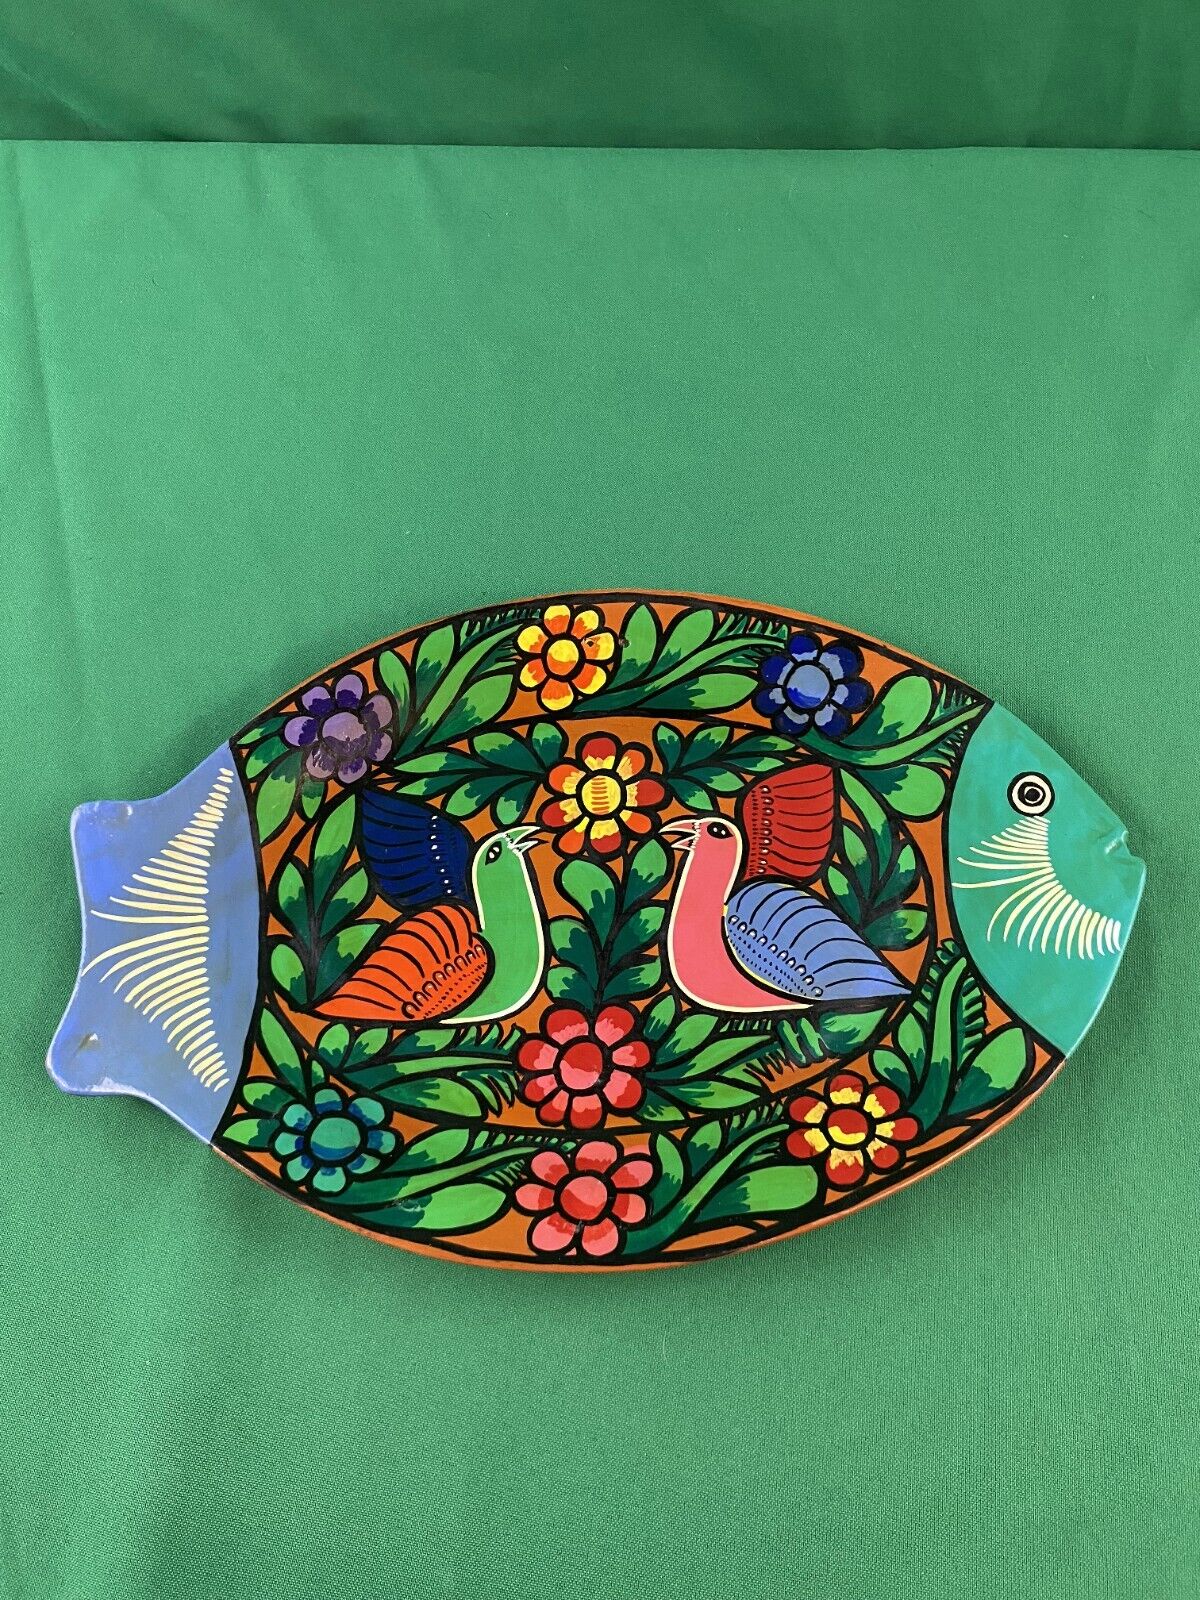 Beautiful Terra Cotta Clay Dish Fish Shaped Hand Painted Birds Bright & Colorful